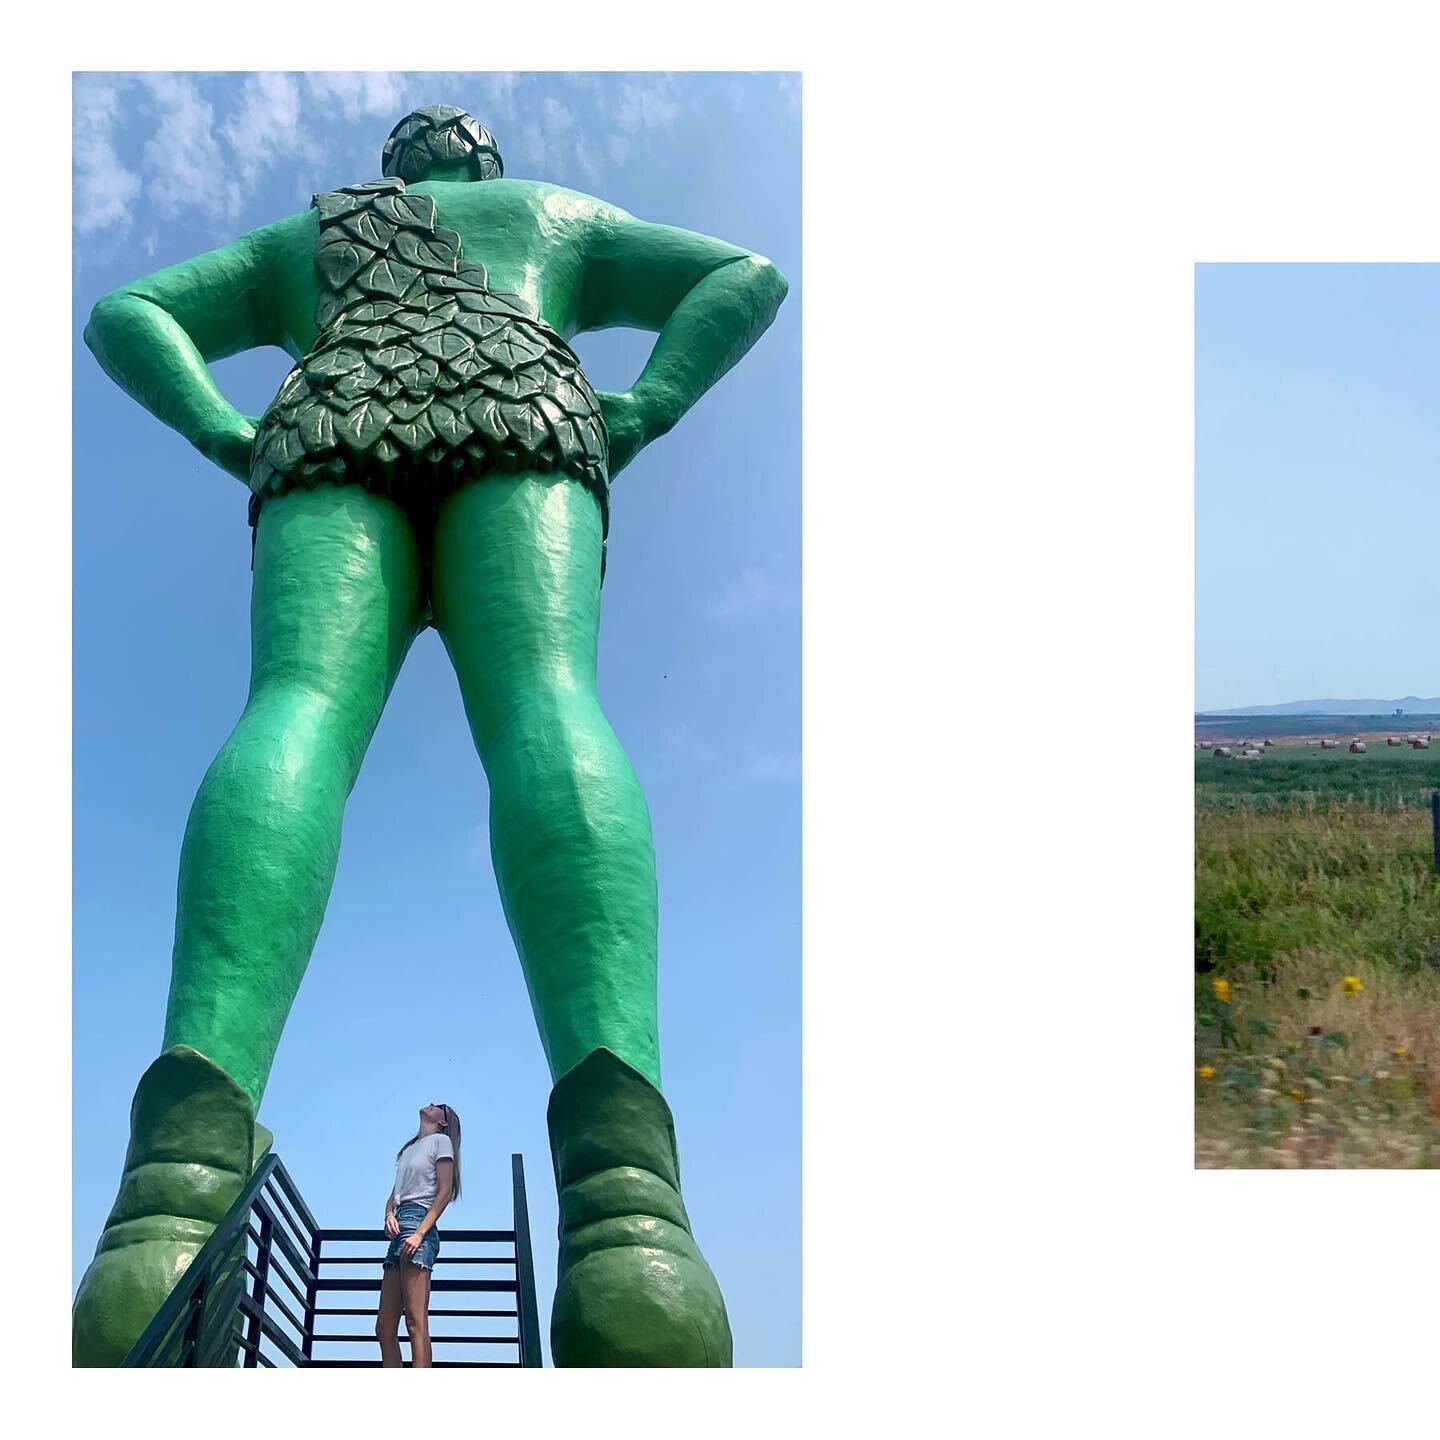 Roadside trivia, August 2020
🚗 
The Jolly Green Giant Statue wears size 78 shoes. 
🥦 
Square hay bales weren&rsquo;t invented until the 1930s.
🐄 
Interstate 90, Minnesota